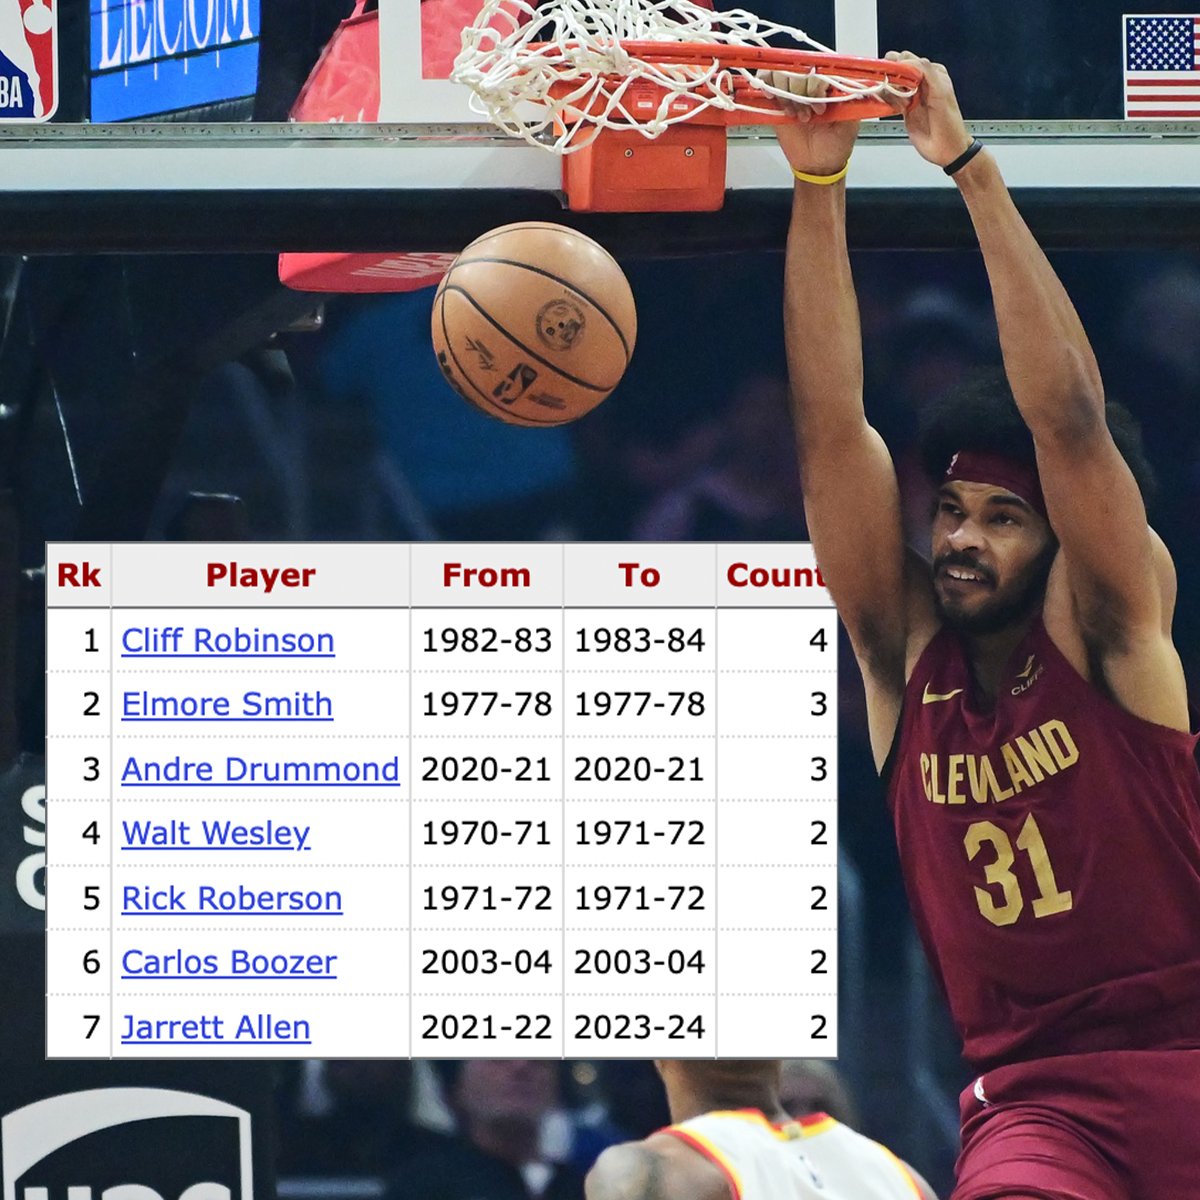 Jarrett Allen is the 7th @Cavs player to have multiple 20-point/20-rebound games. #Cavs | #LetEmKnow